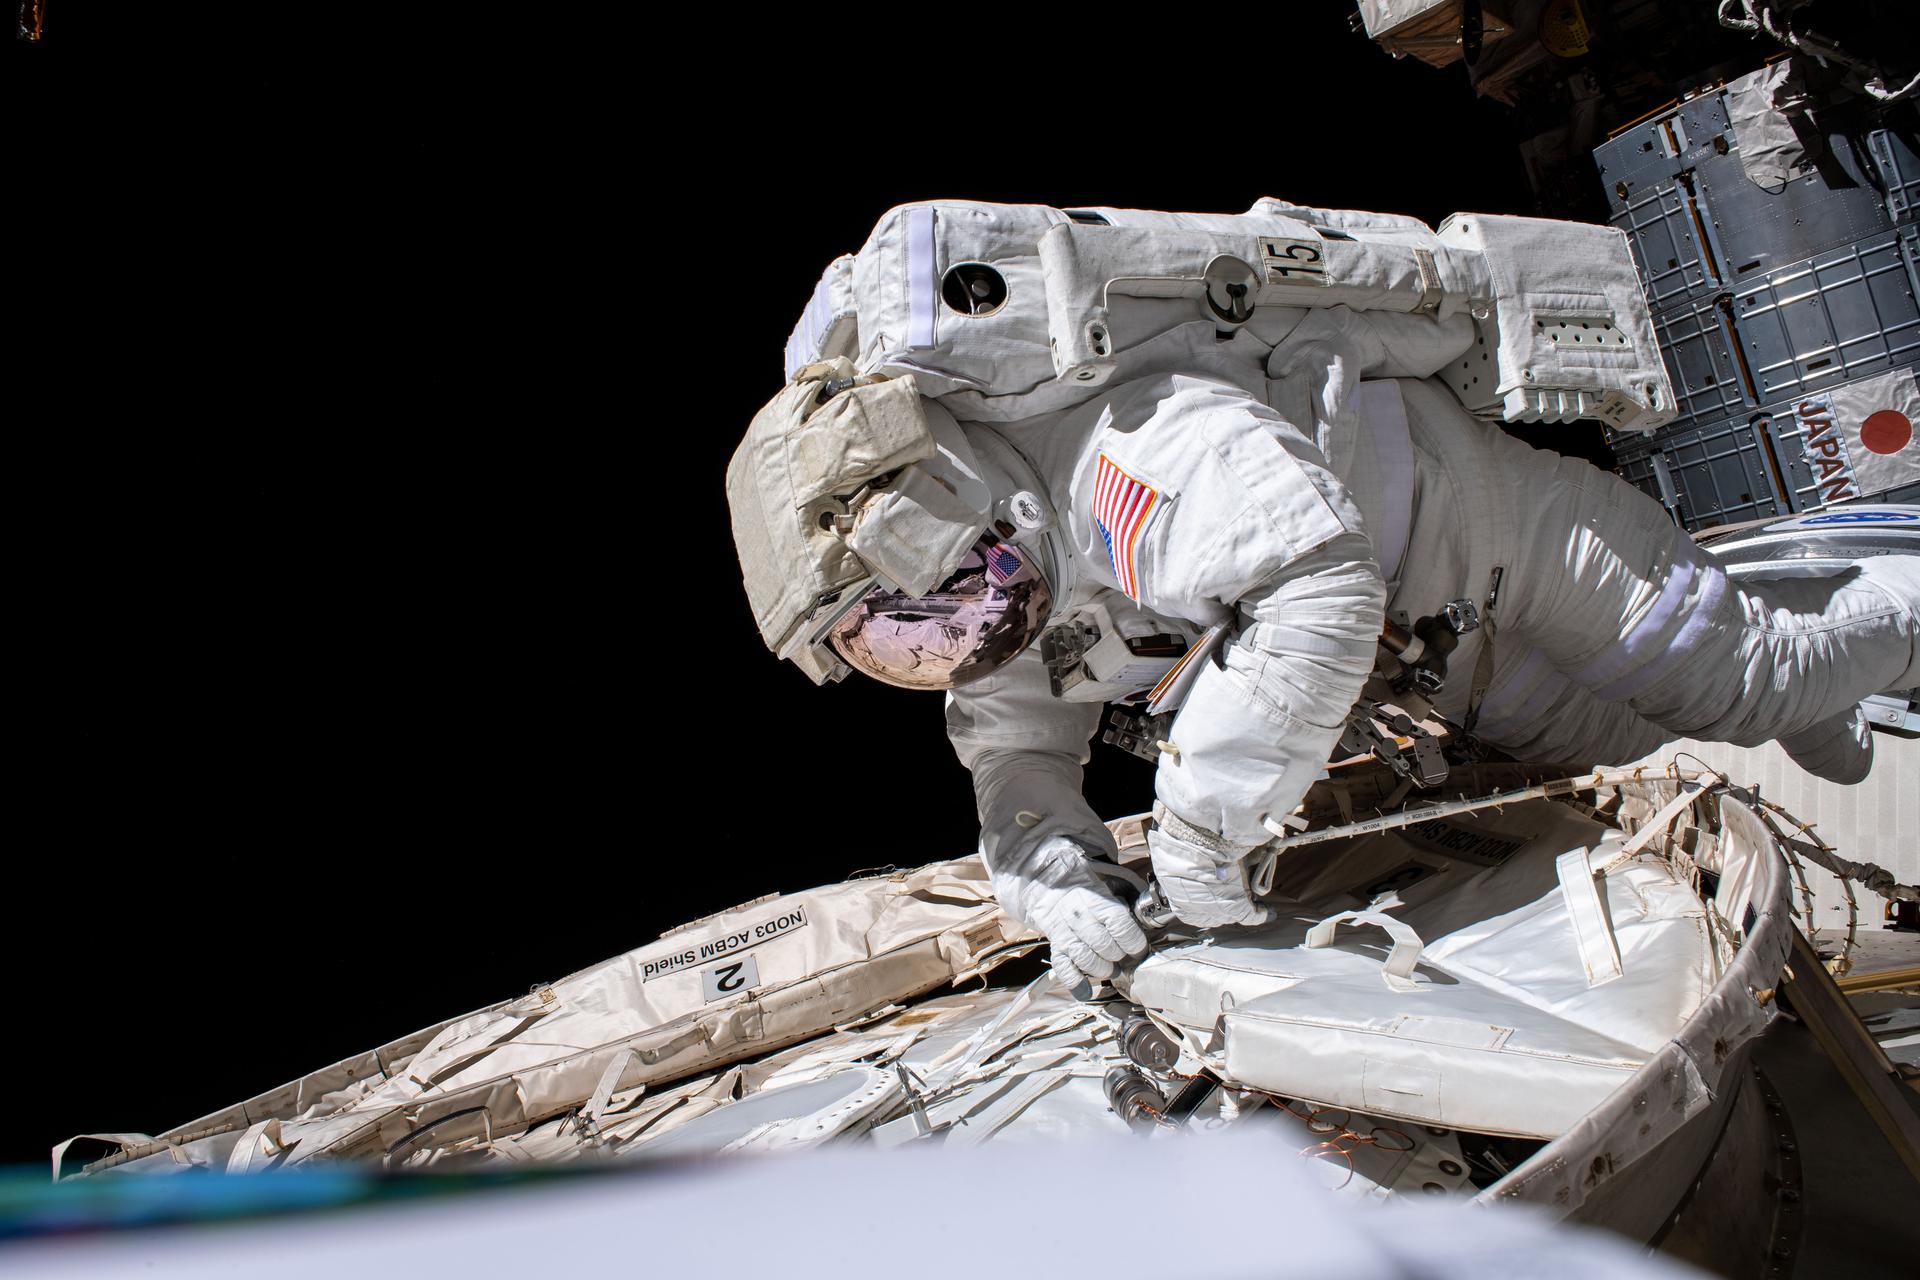 NASA Astronauts Conduct Spacewalks to Collect Microorganism Samples from ISS Exterior